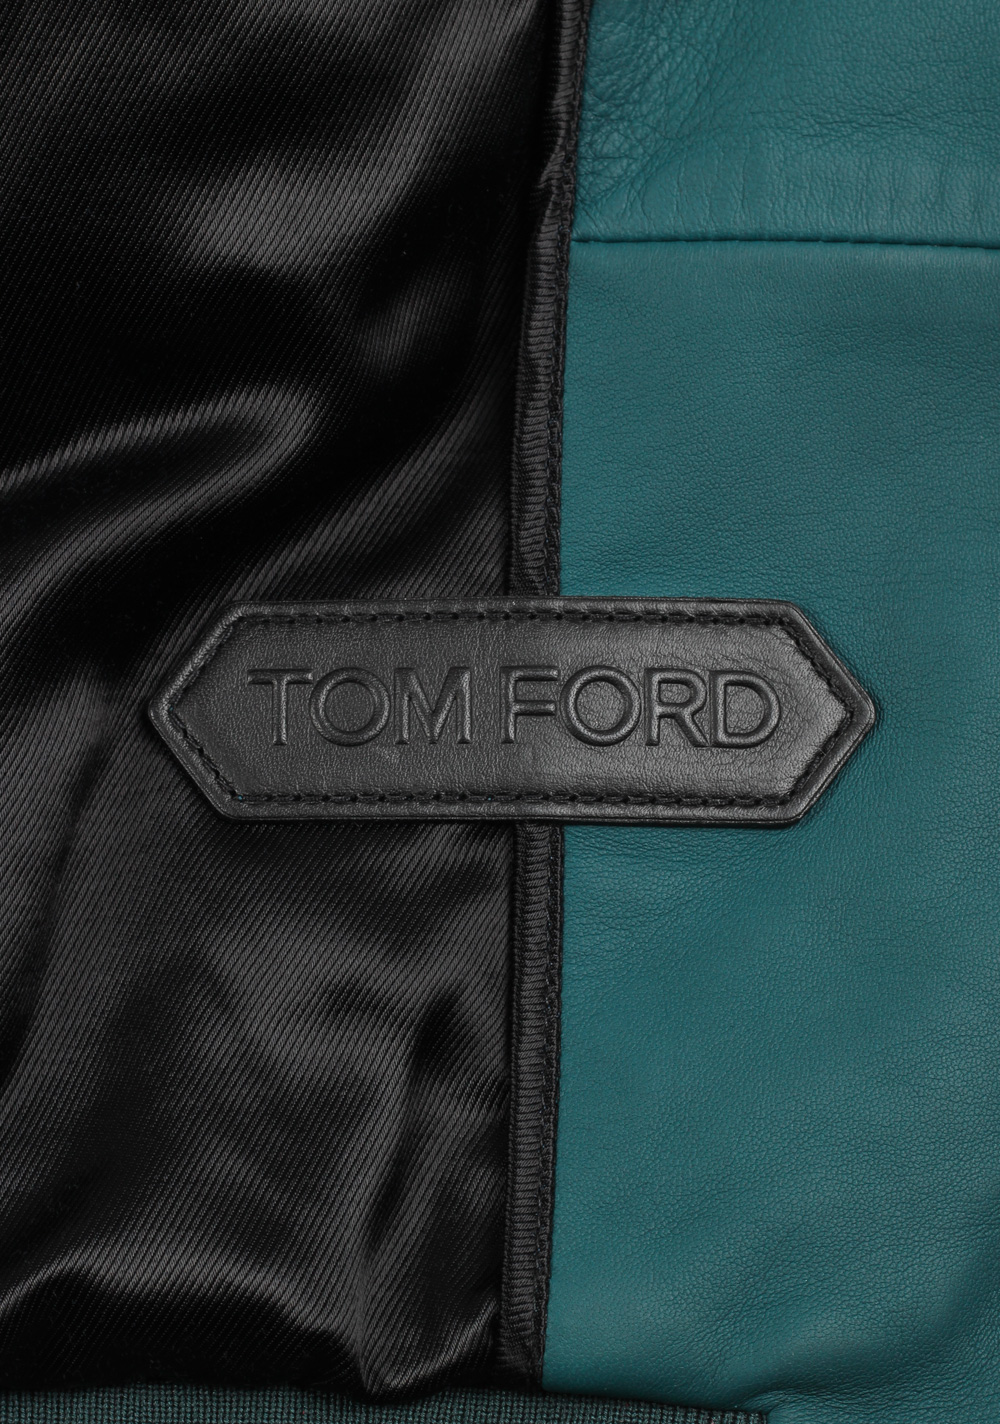 TOM FORD Green Lamb Suede Bomber Jacket  Size 50 / 40R U.S. | Costume Limité